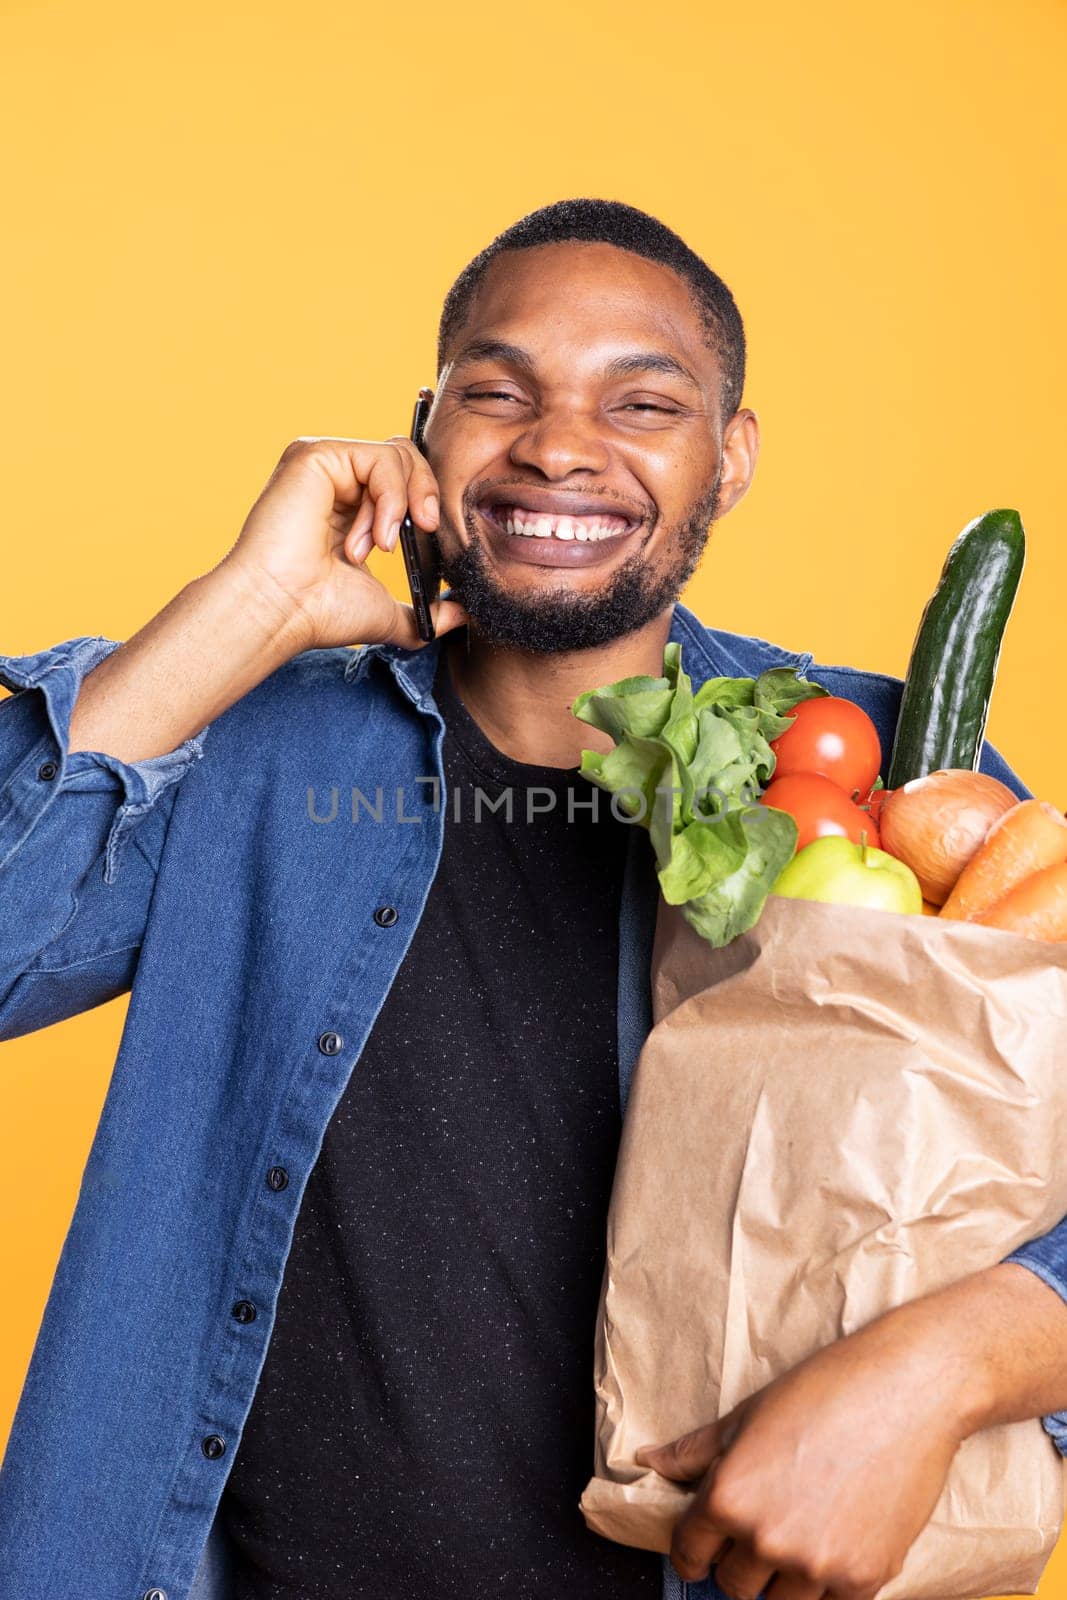 African american charismatic adult chats on his mobile device in studio, carries a paper bag full of groceries from local supermarket. Joyful friendly guy answers phone call during shopping.